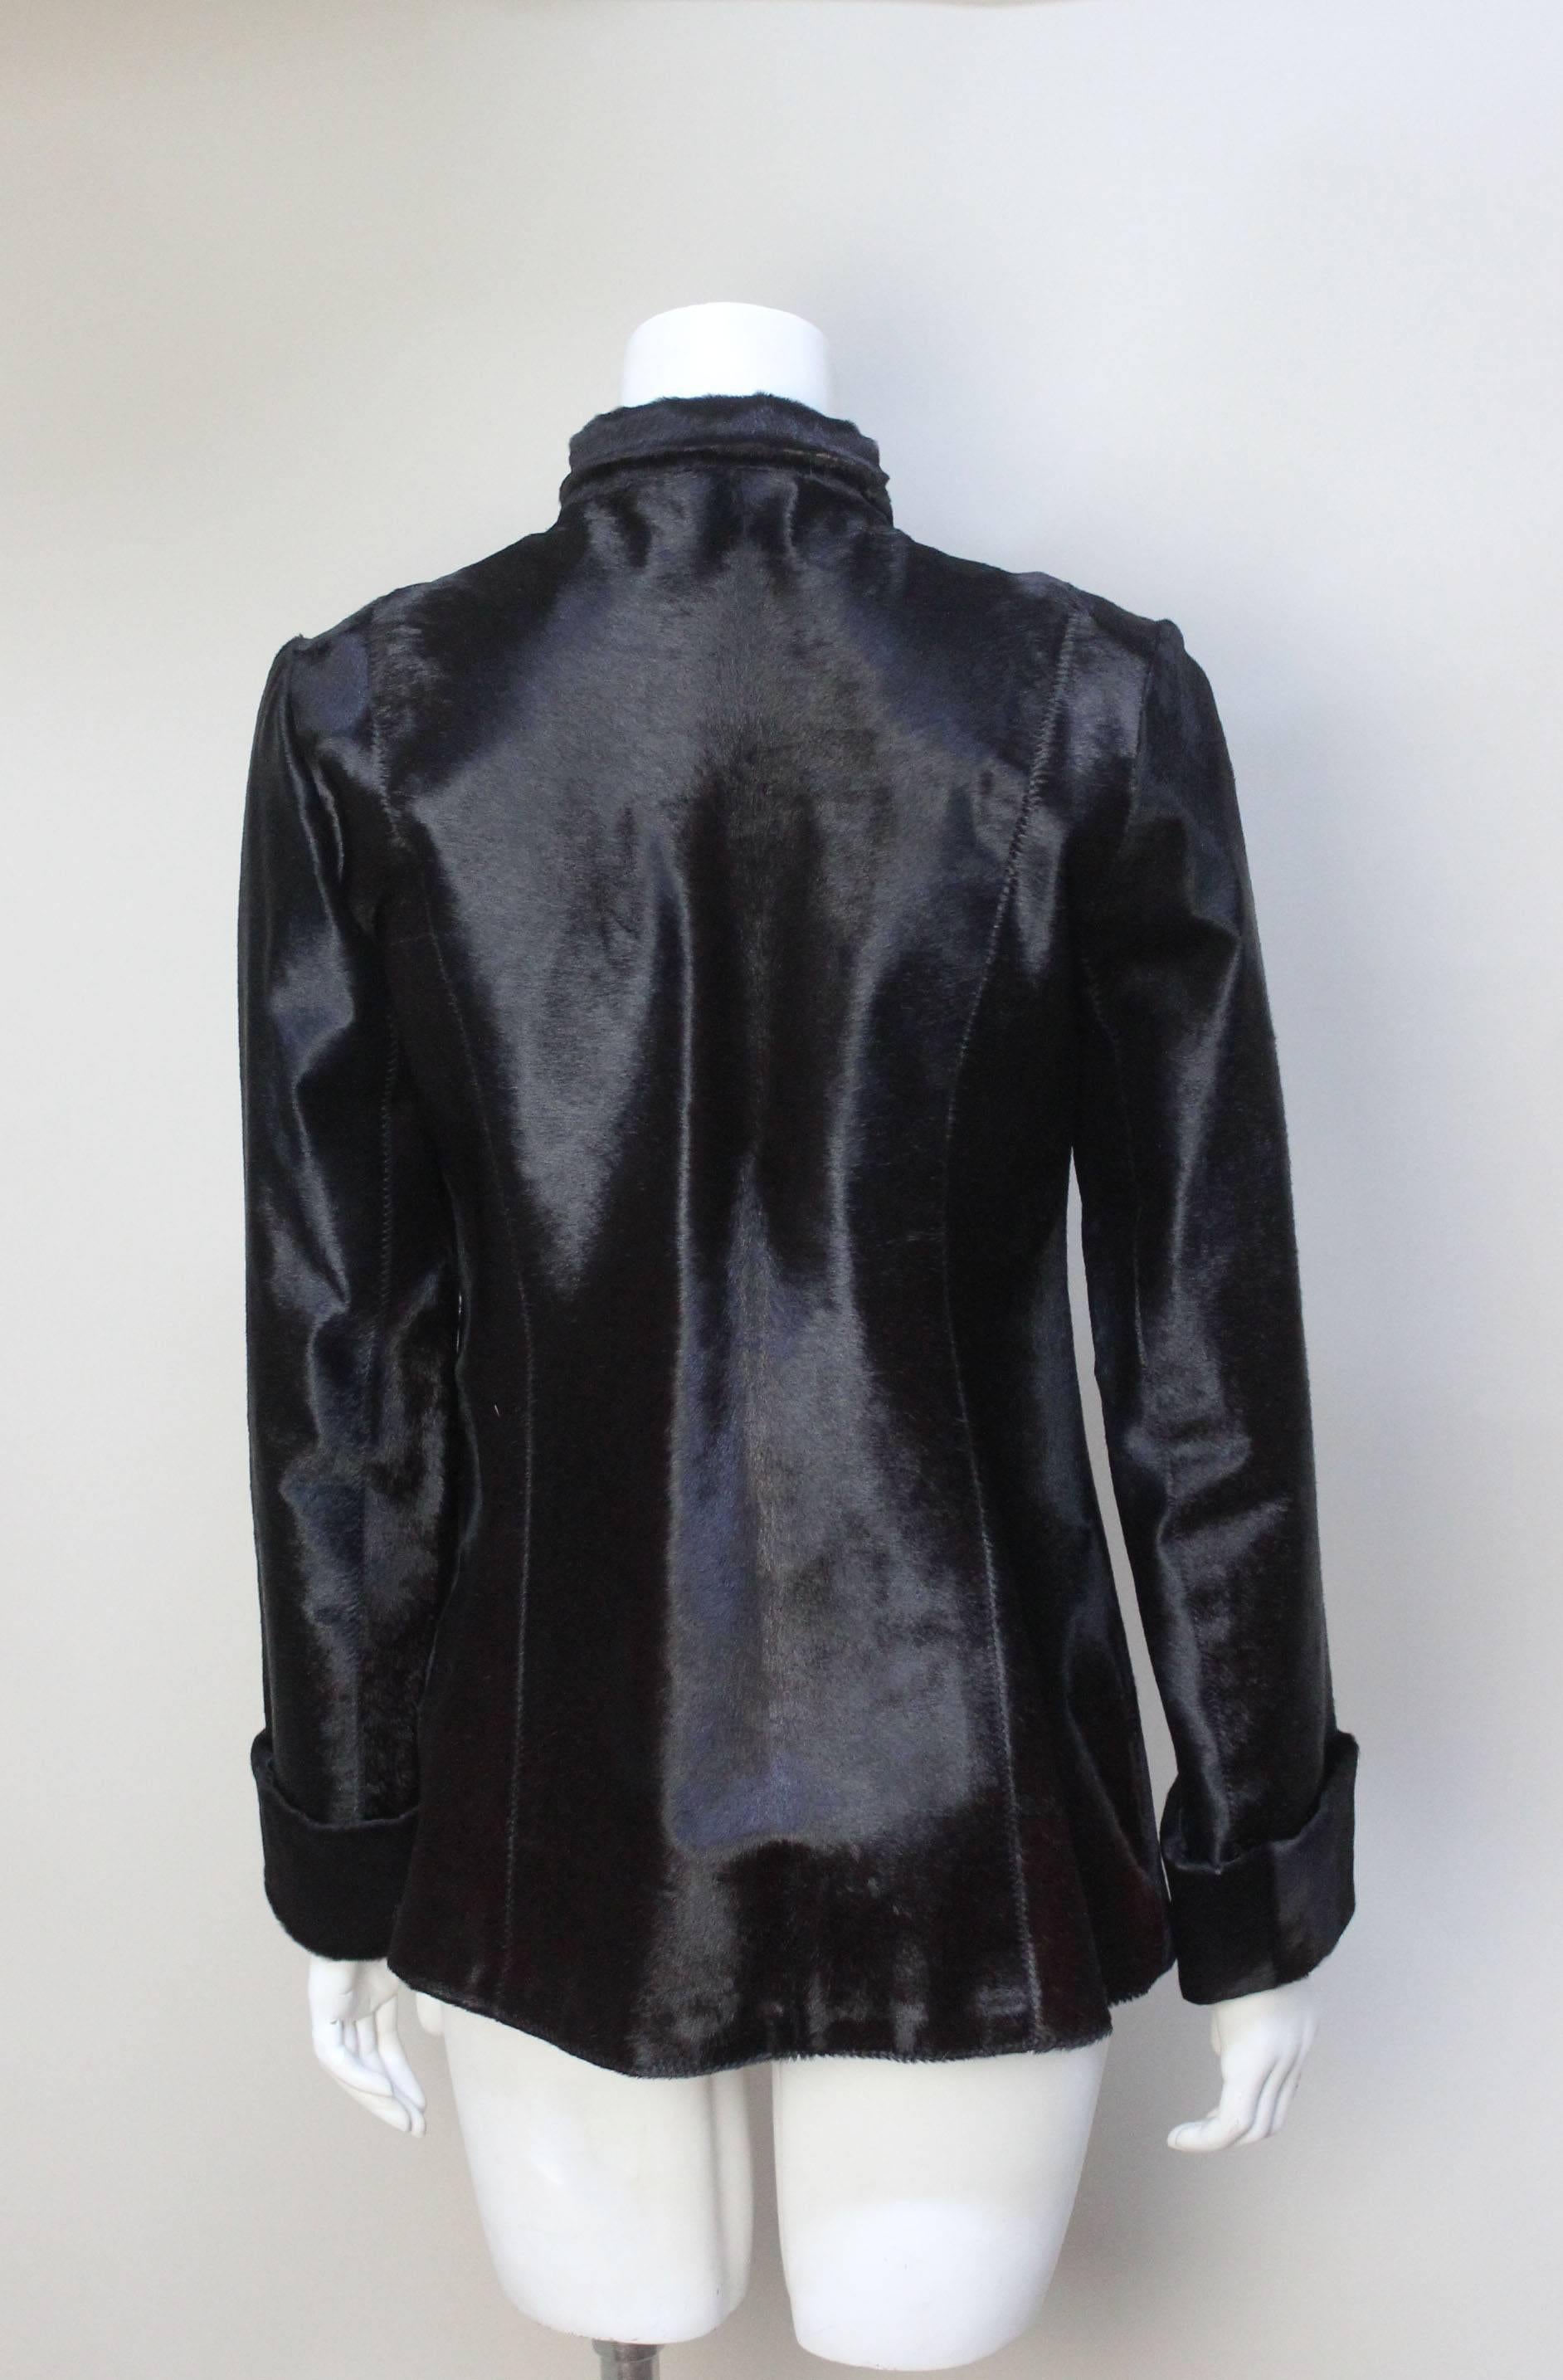 Vintage Custom Made Pony Skin Jacket with Architectural Fastenings In Excellent Condition For Sale In New York, NY